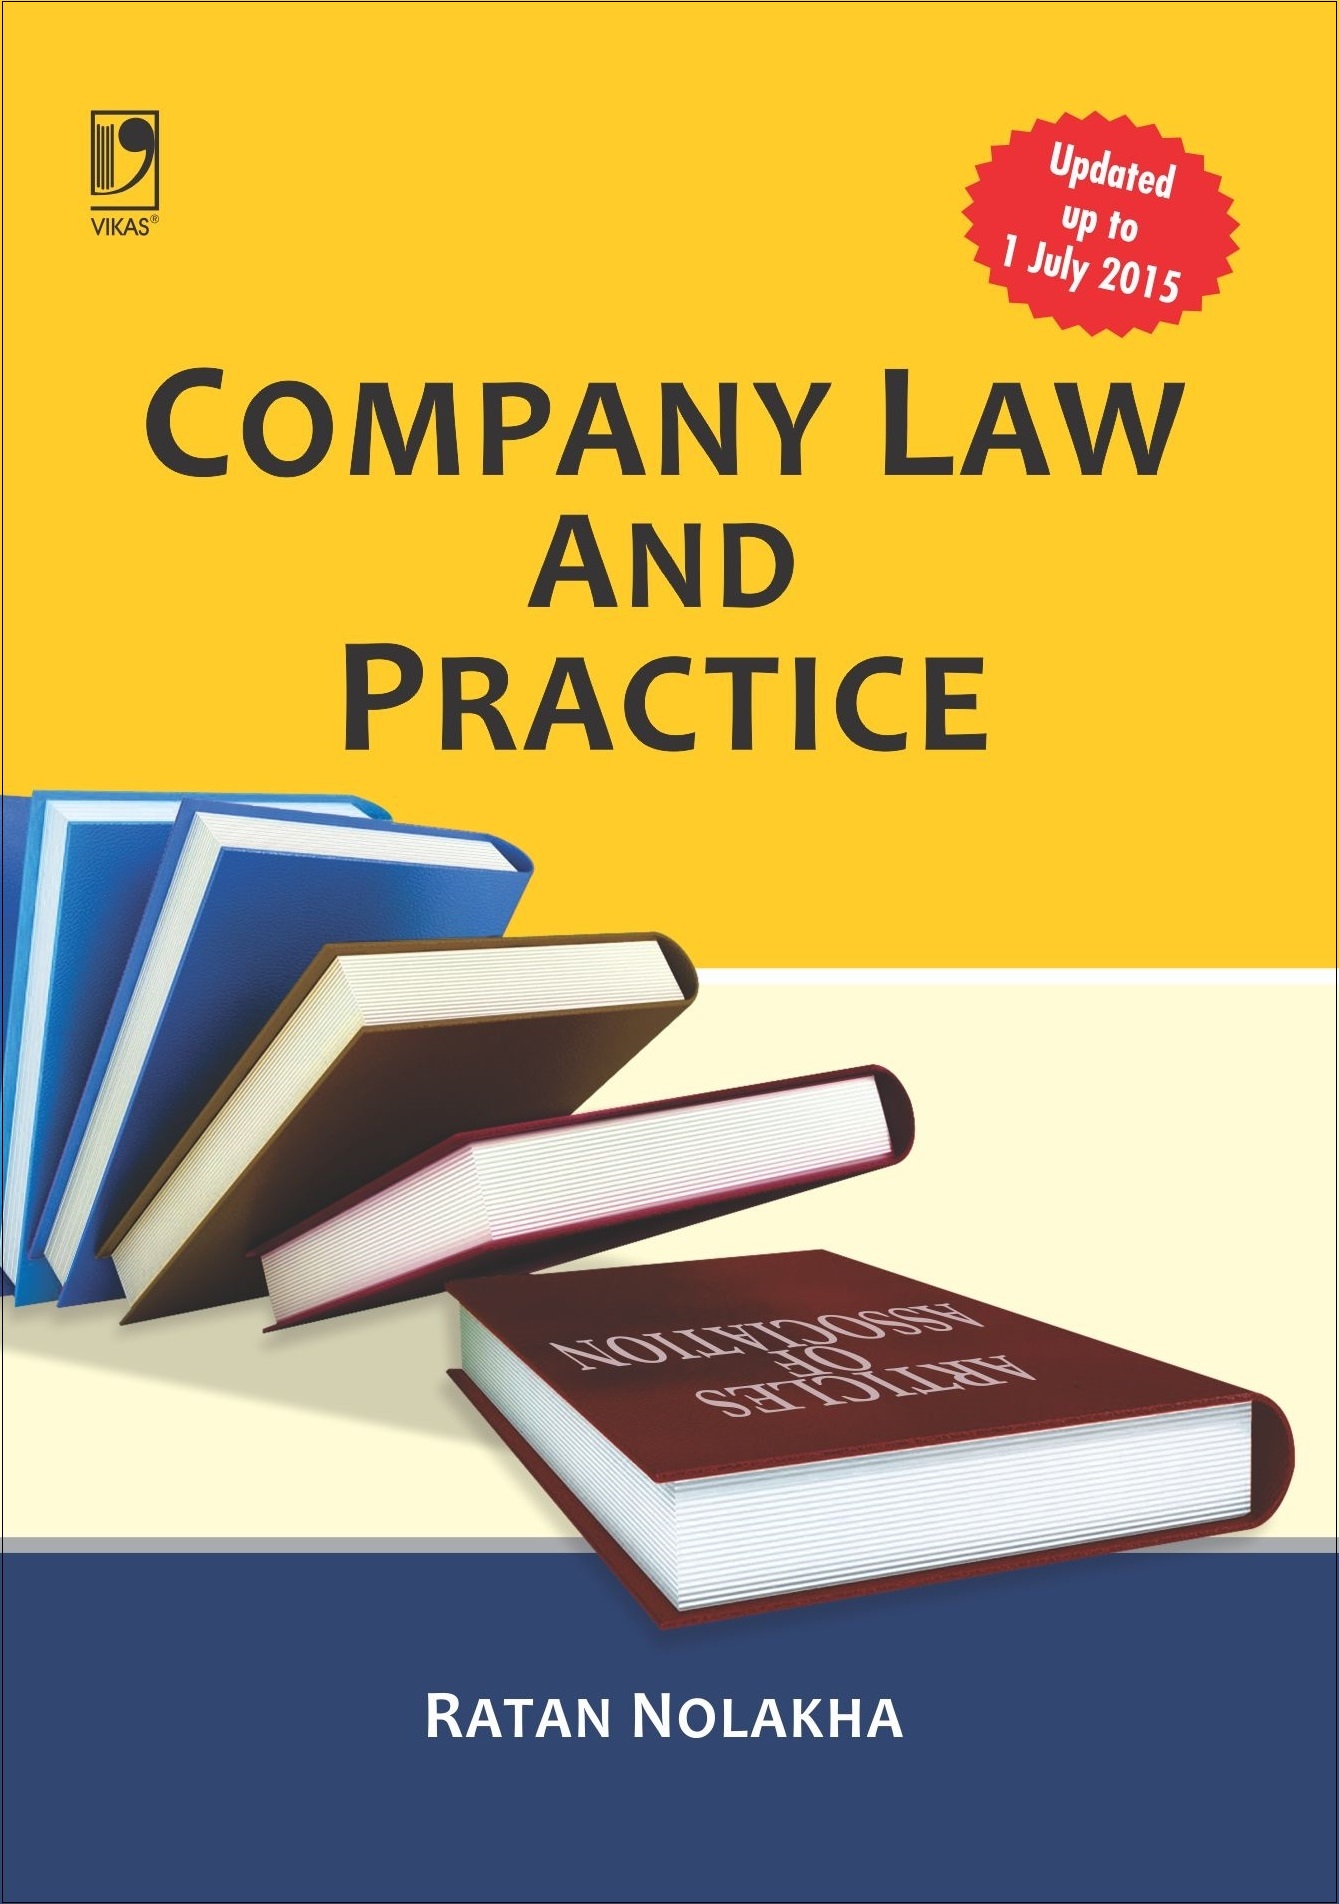 COMPANY LAW AND PRACTICE